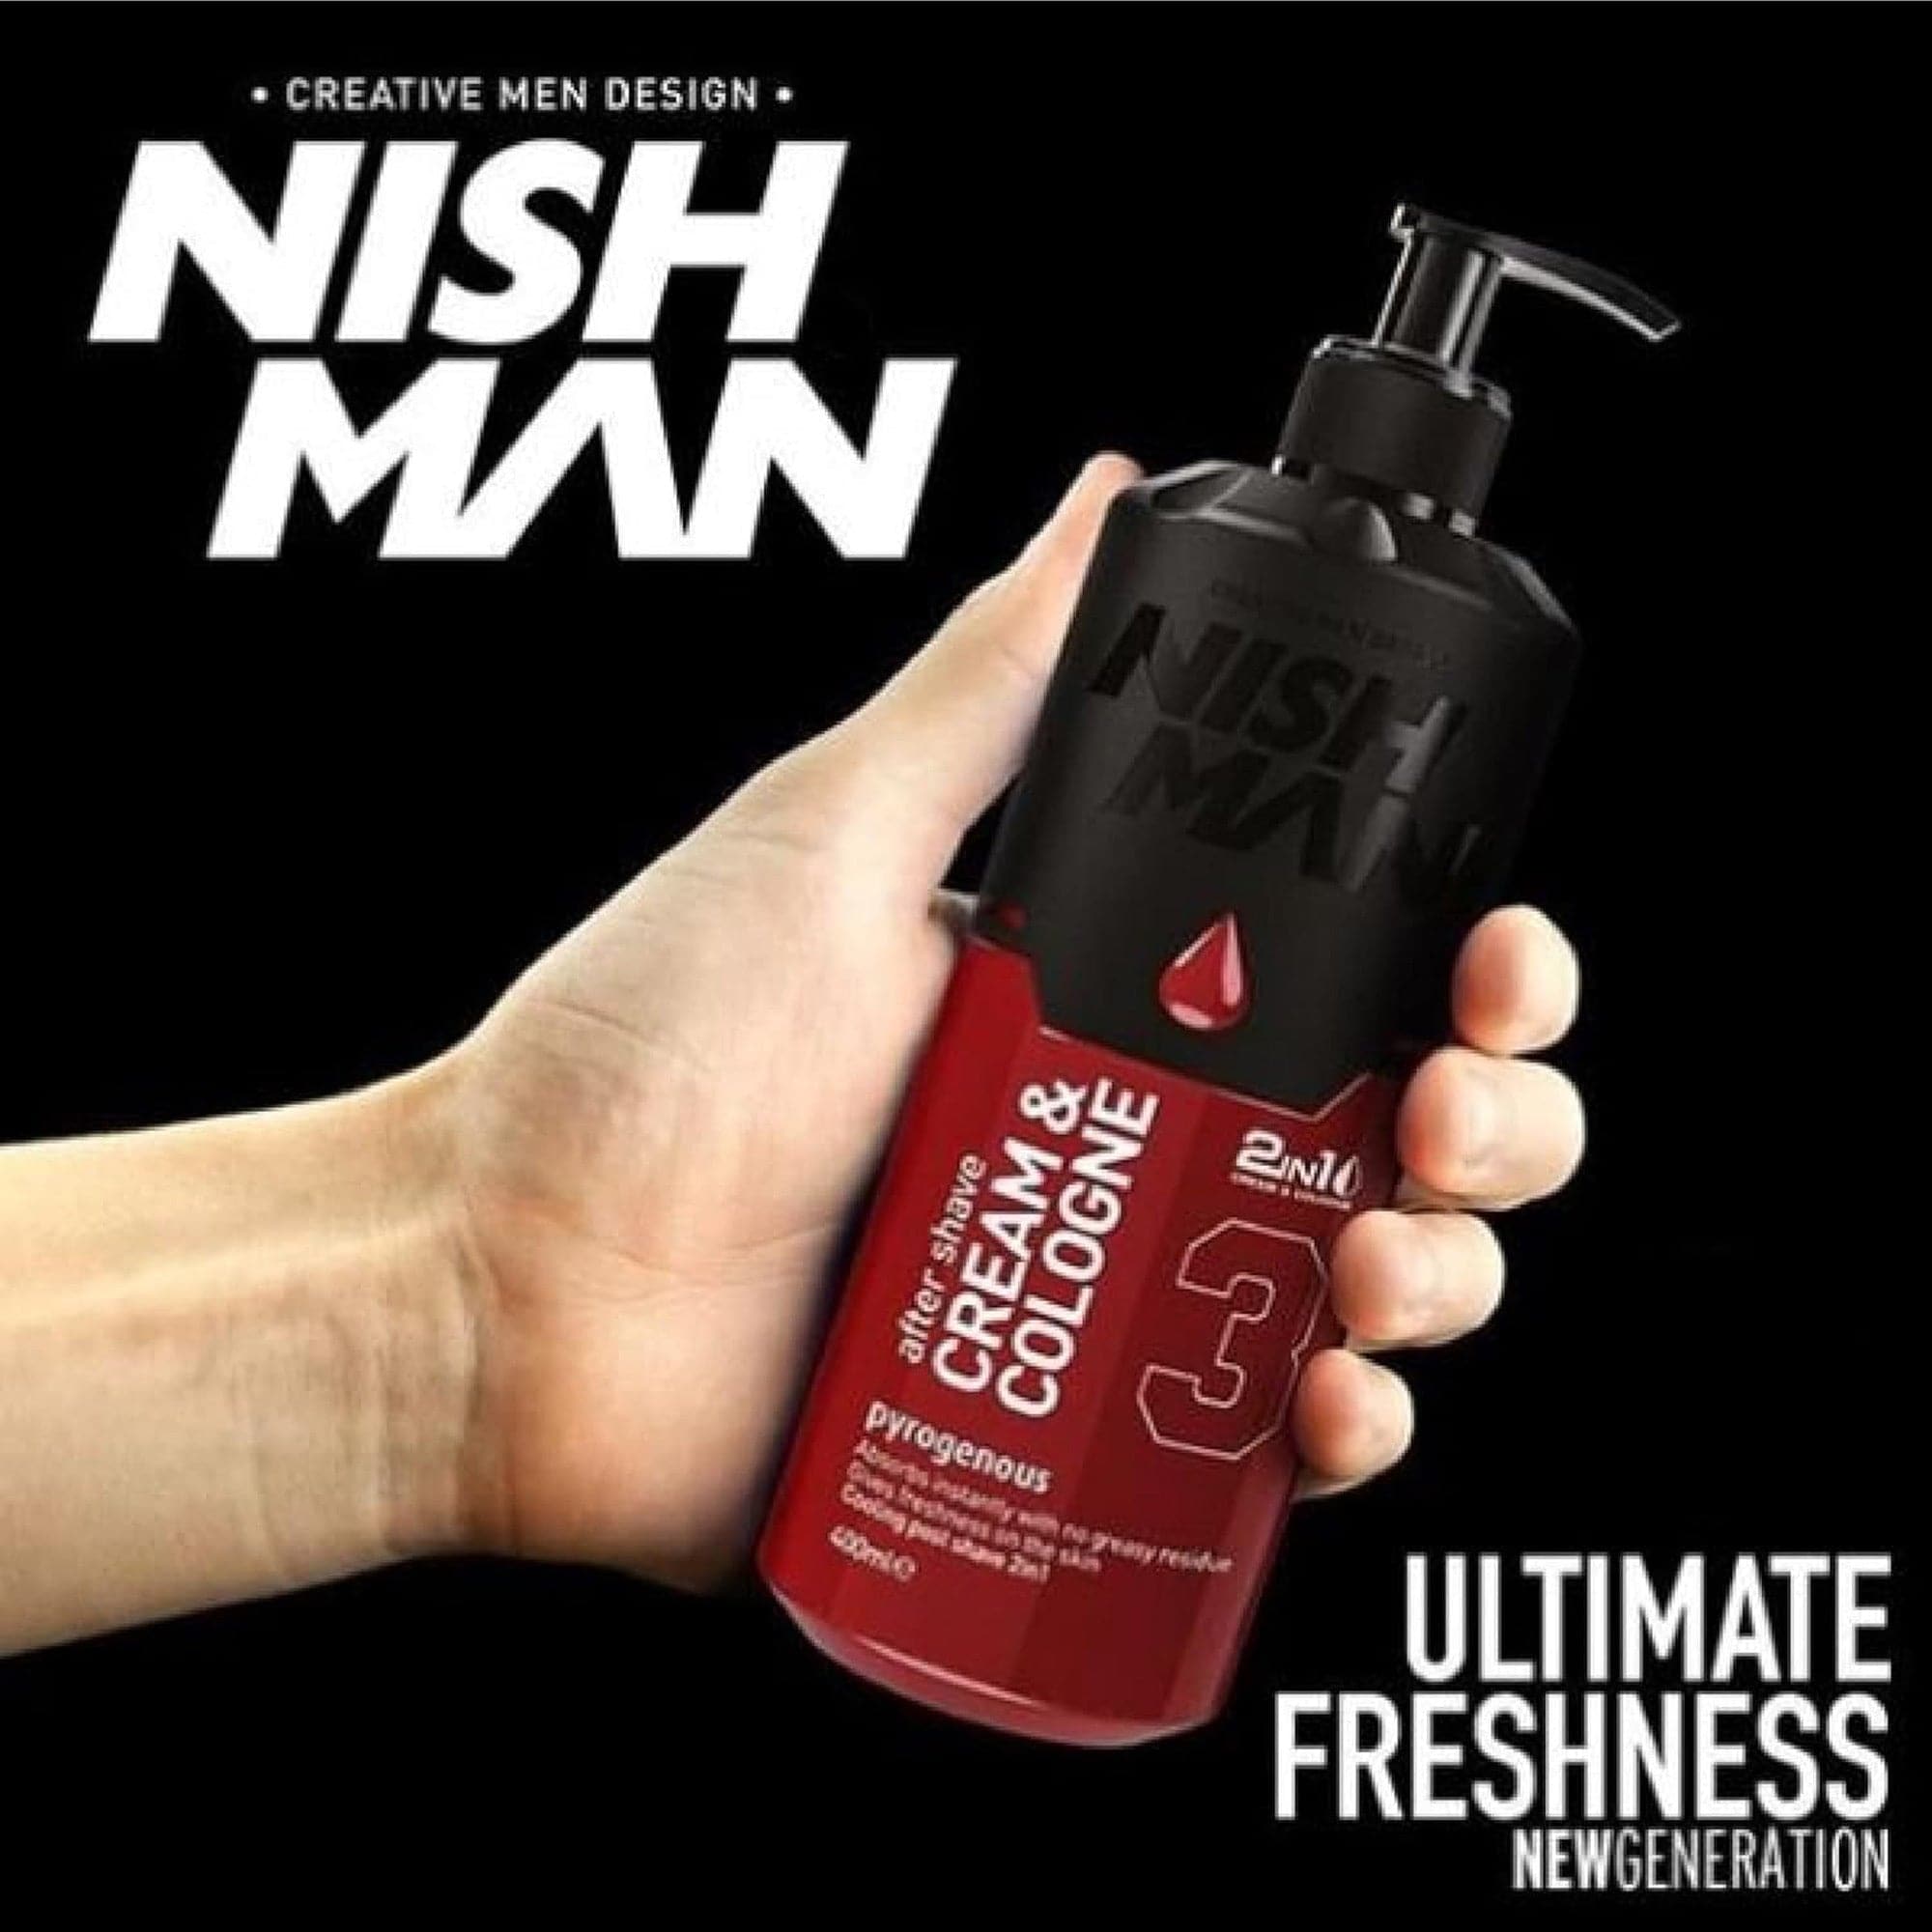 Nishman - After Shave Cream & Cologne 2in1 No.3 Pyrogenous 400ml